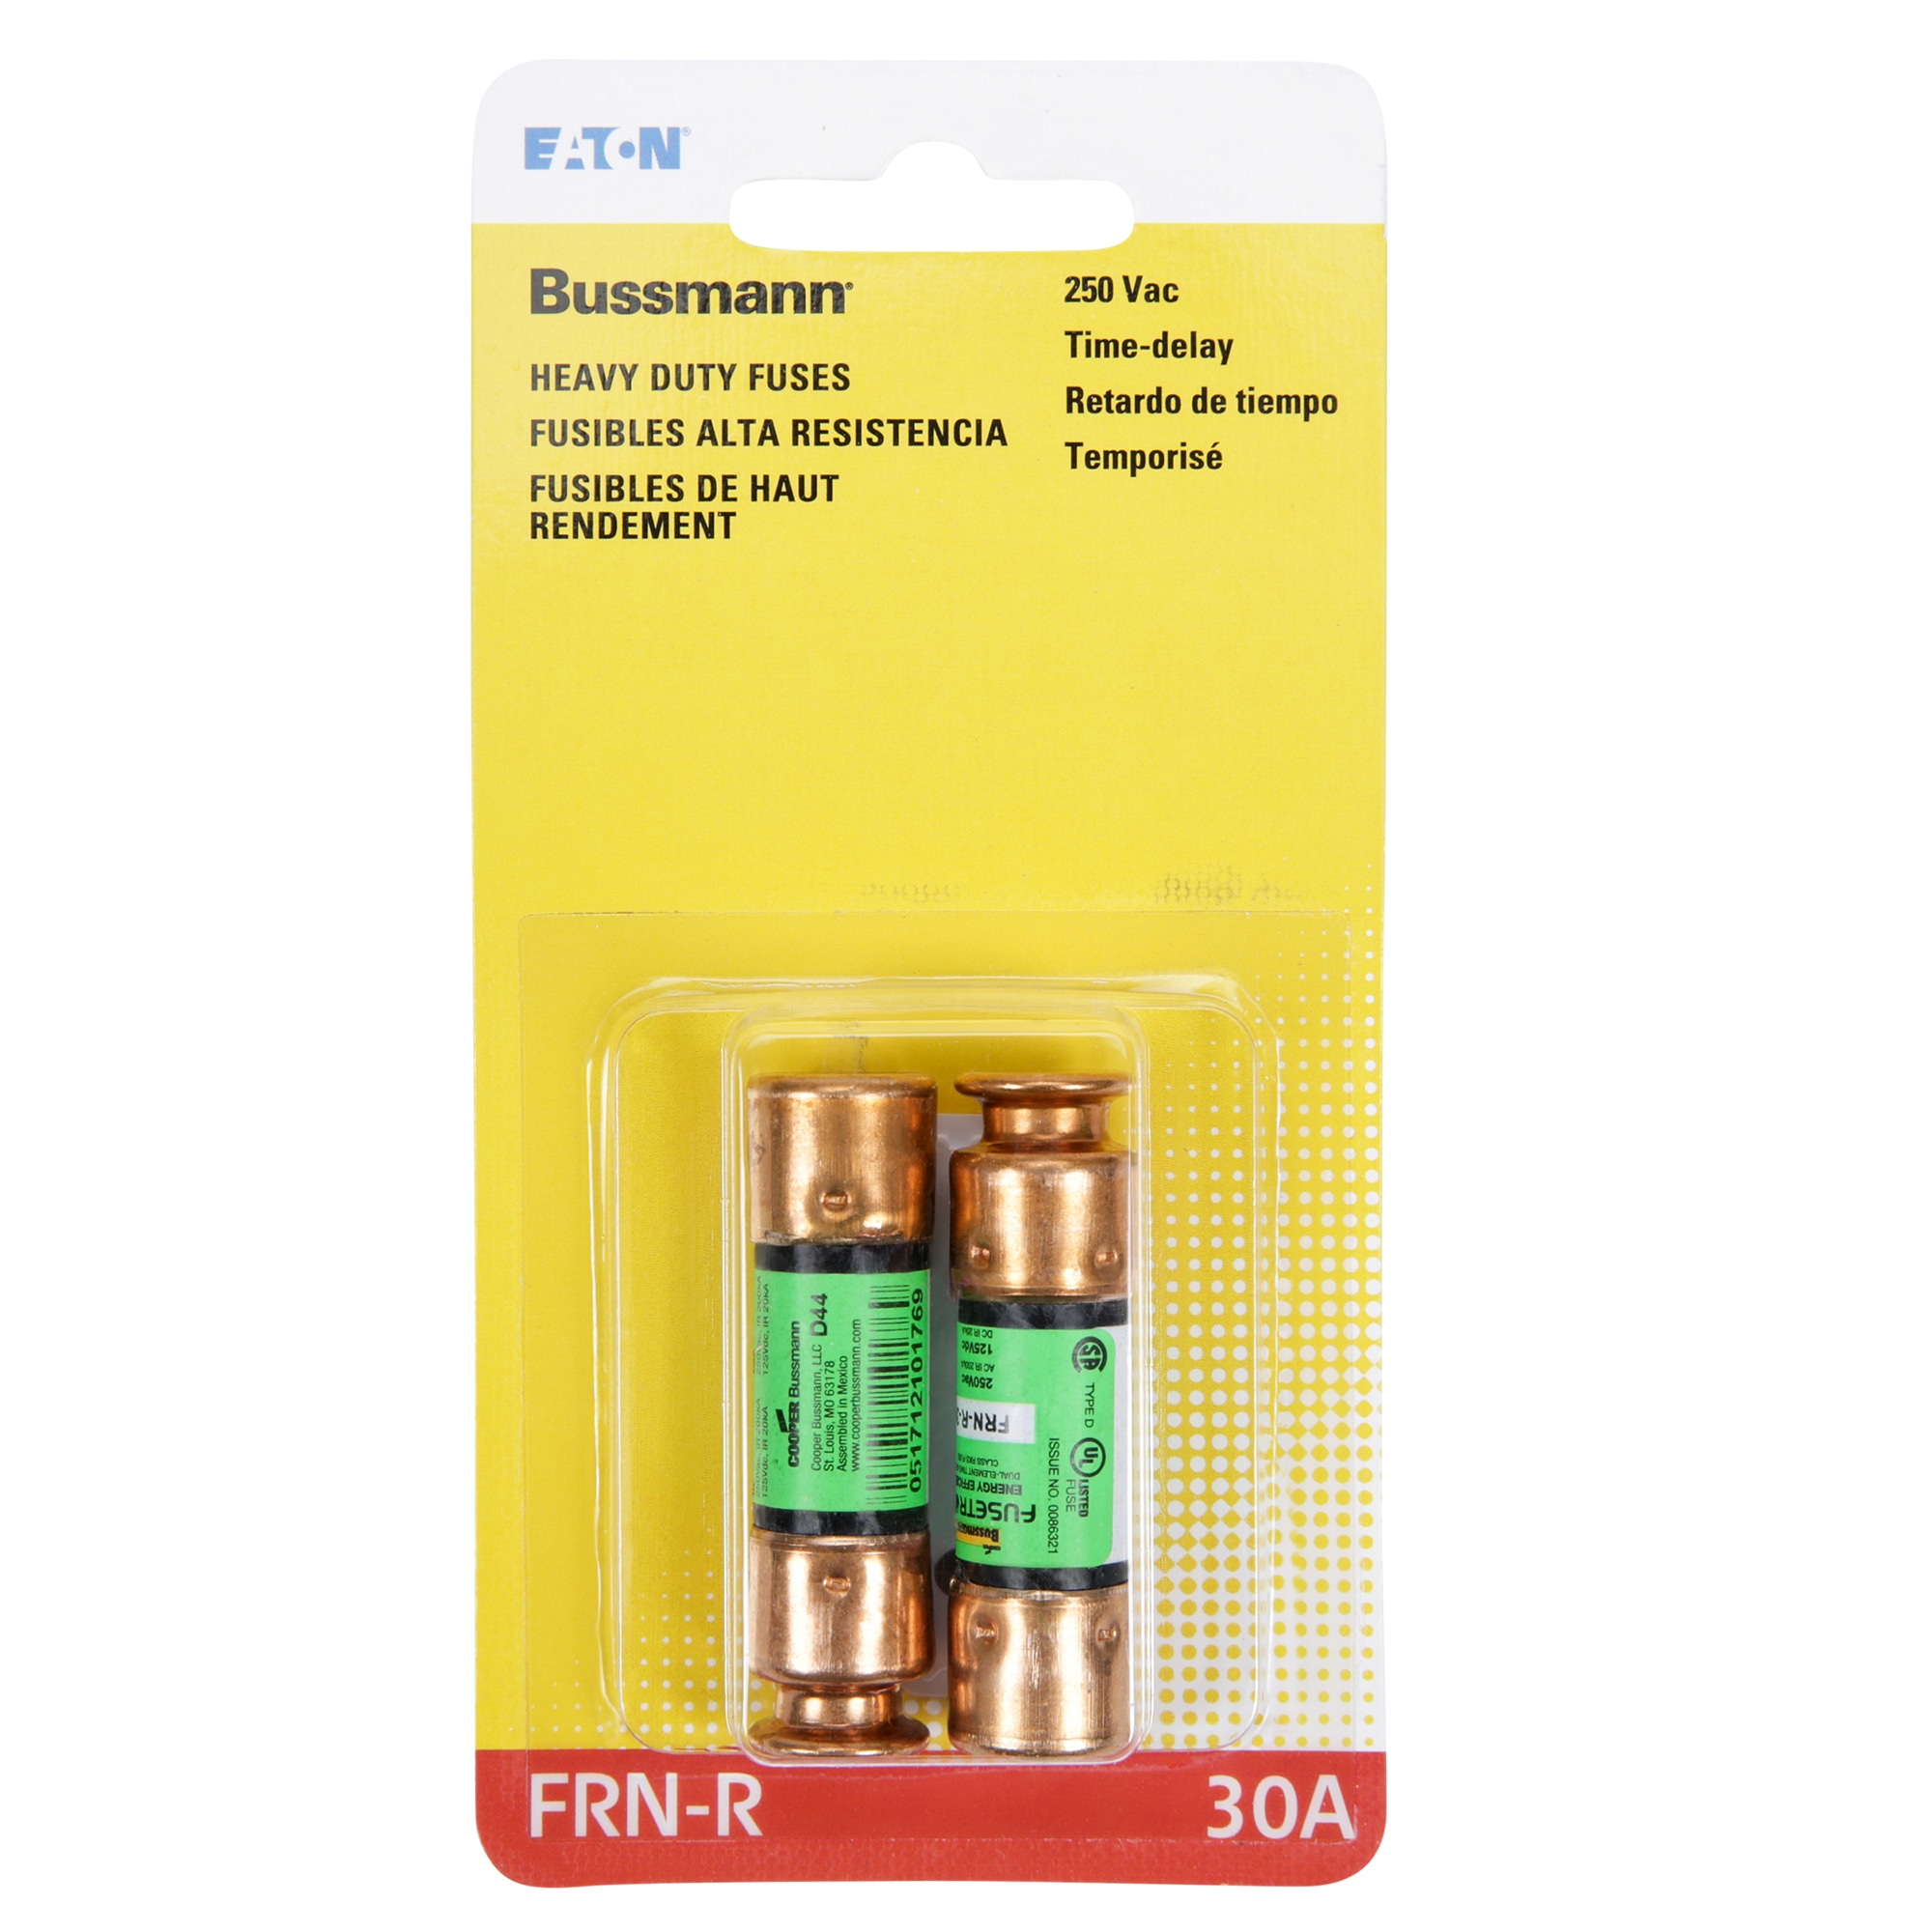 Bussmann Non-30 30 Amp One-time Cartridge Fuse 250v for sale online 